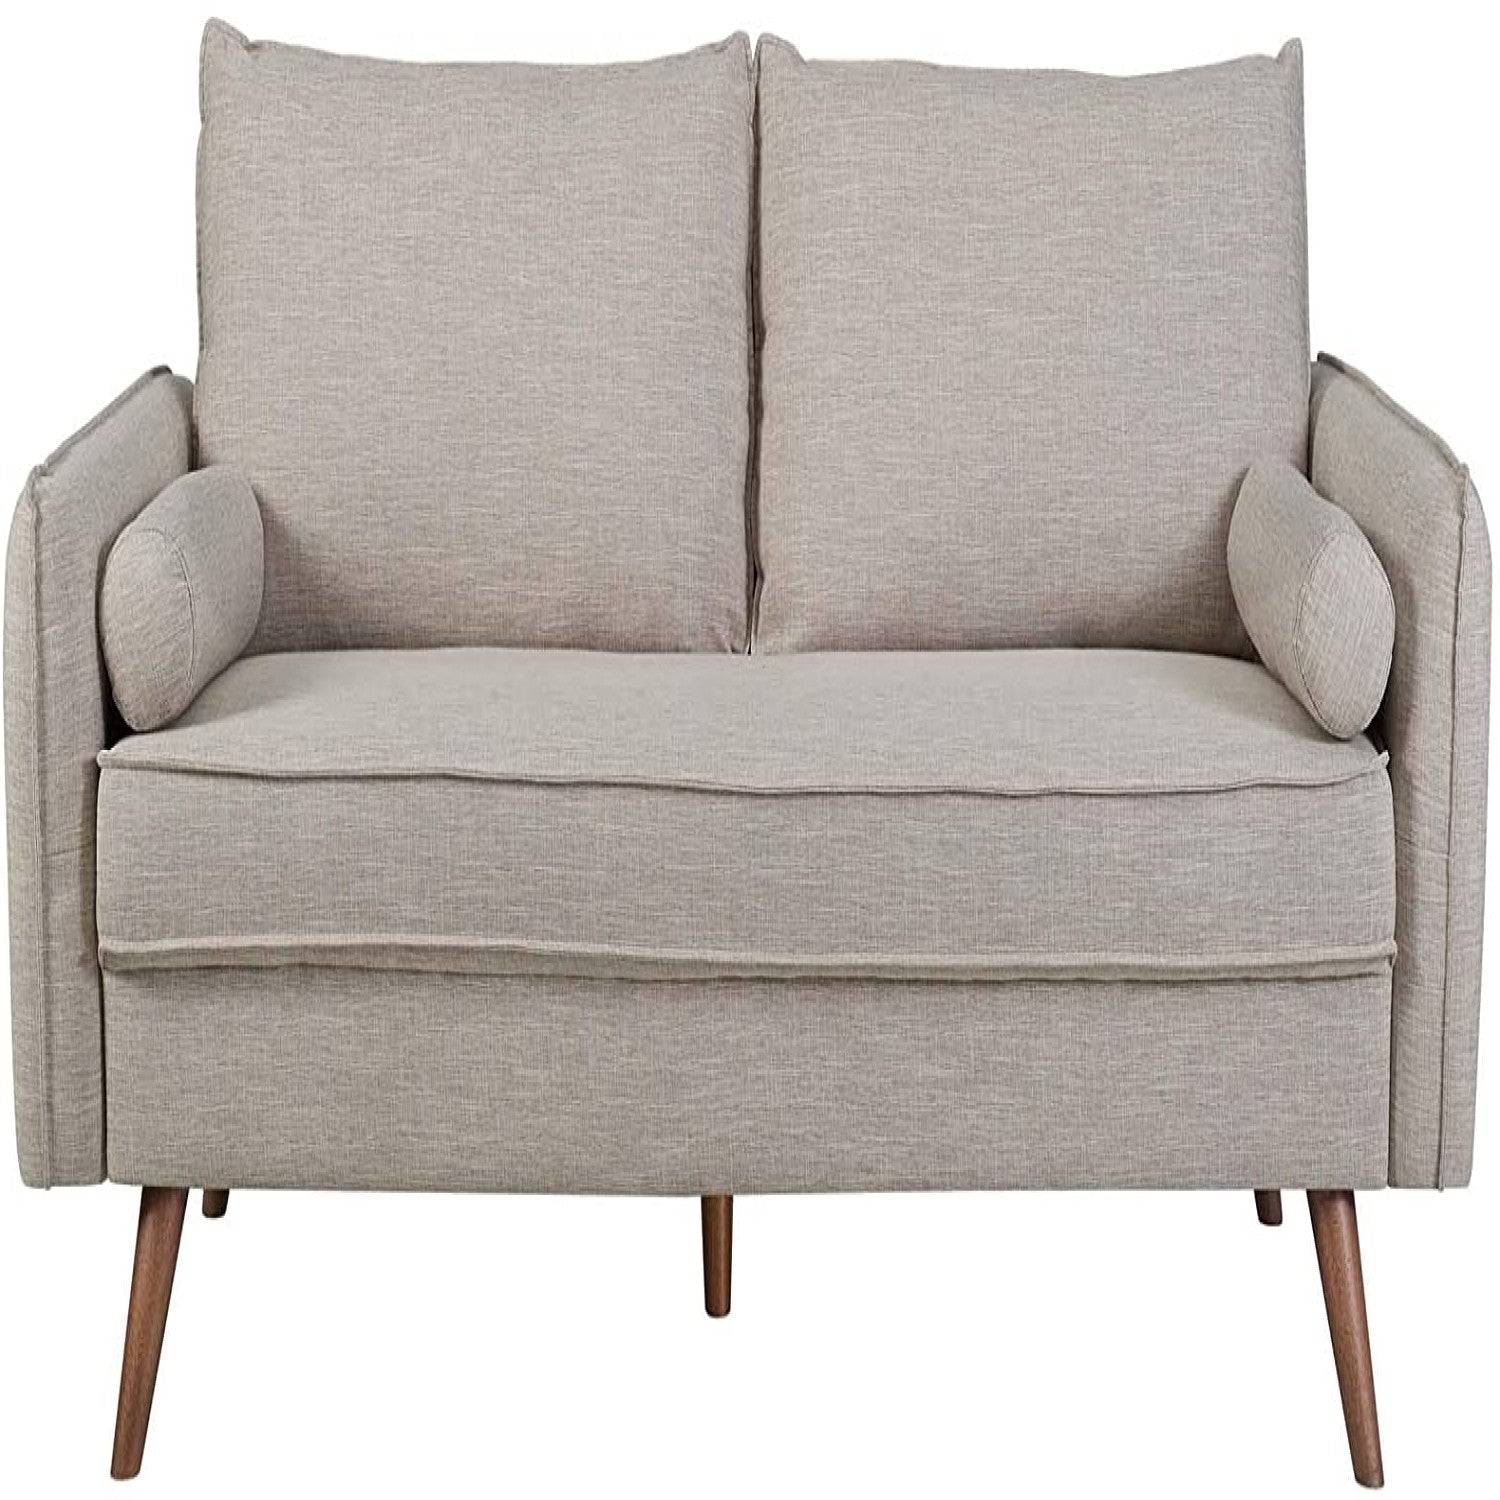 Living Room > Sofas - Modern Couch Beige Upholstered Sofa With With Mid-Century Style Wood Legs